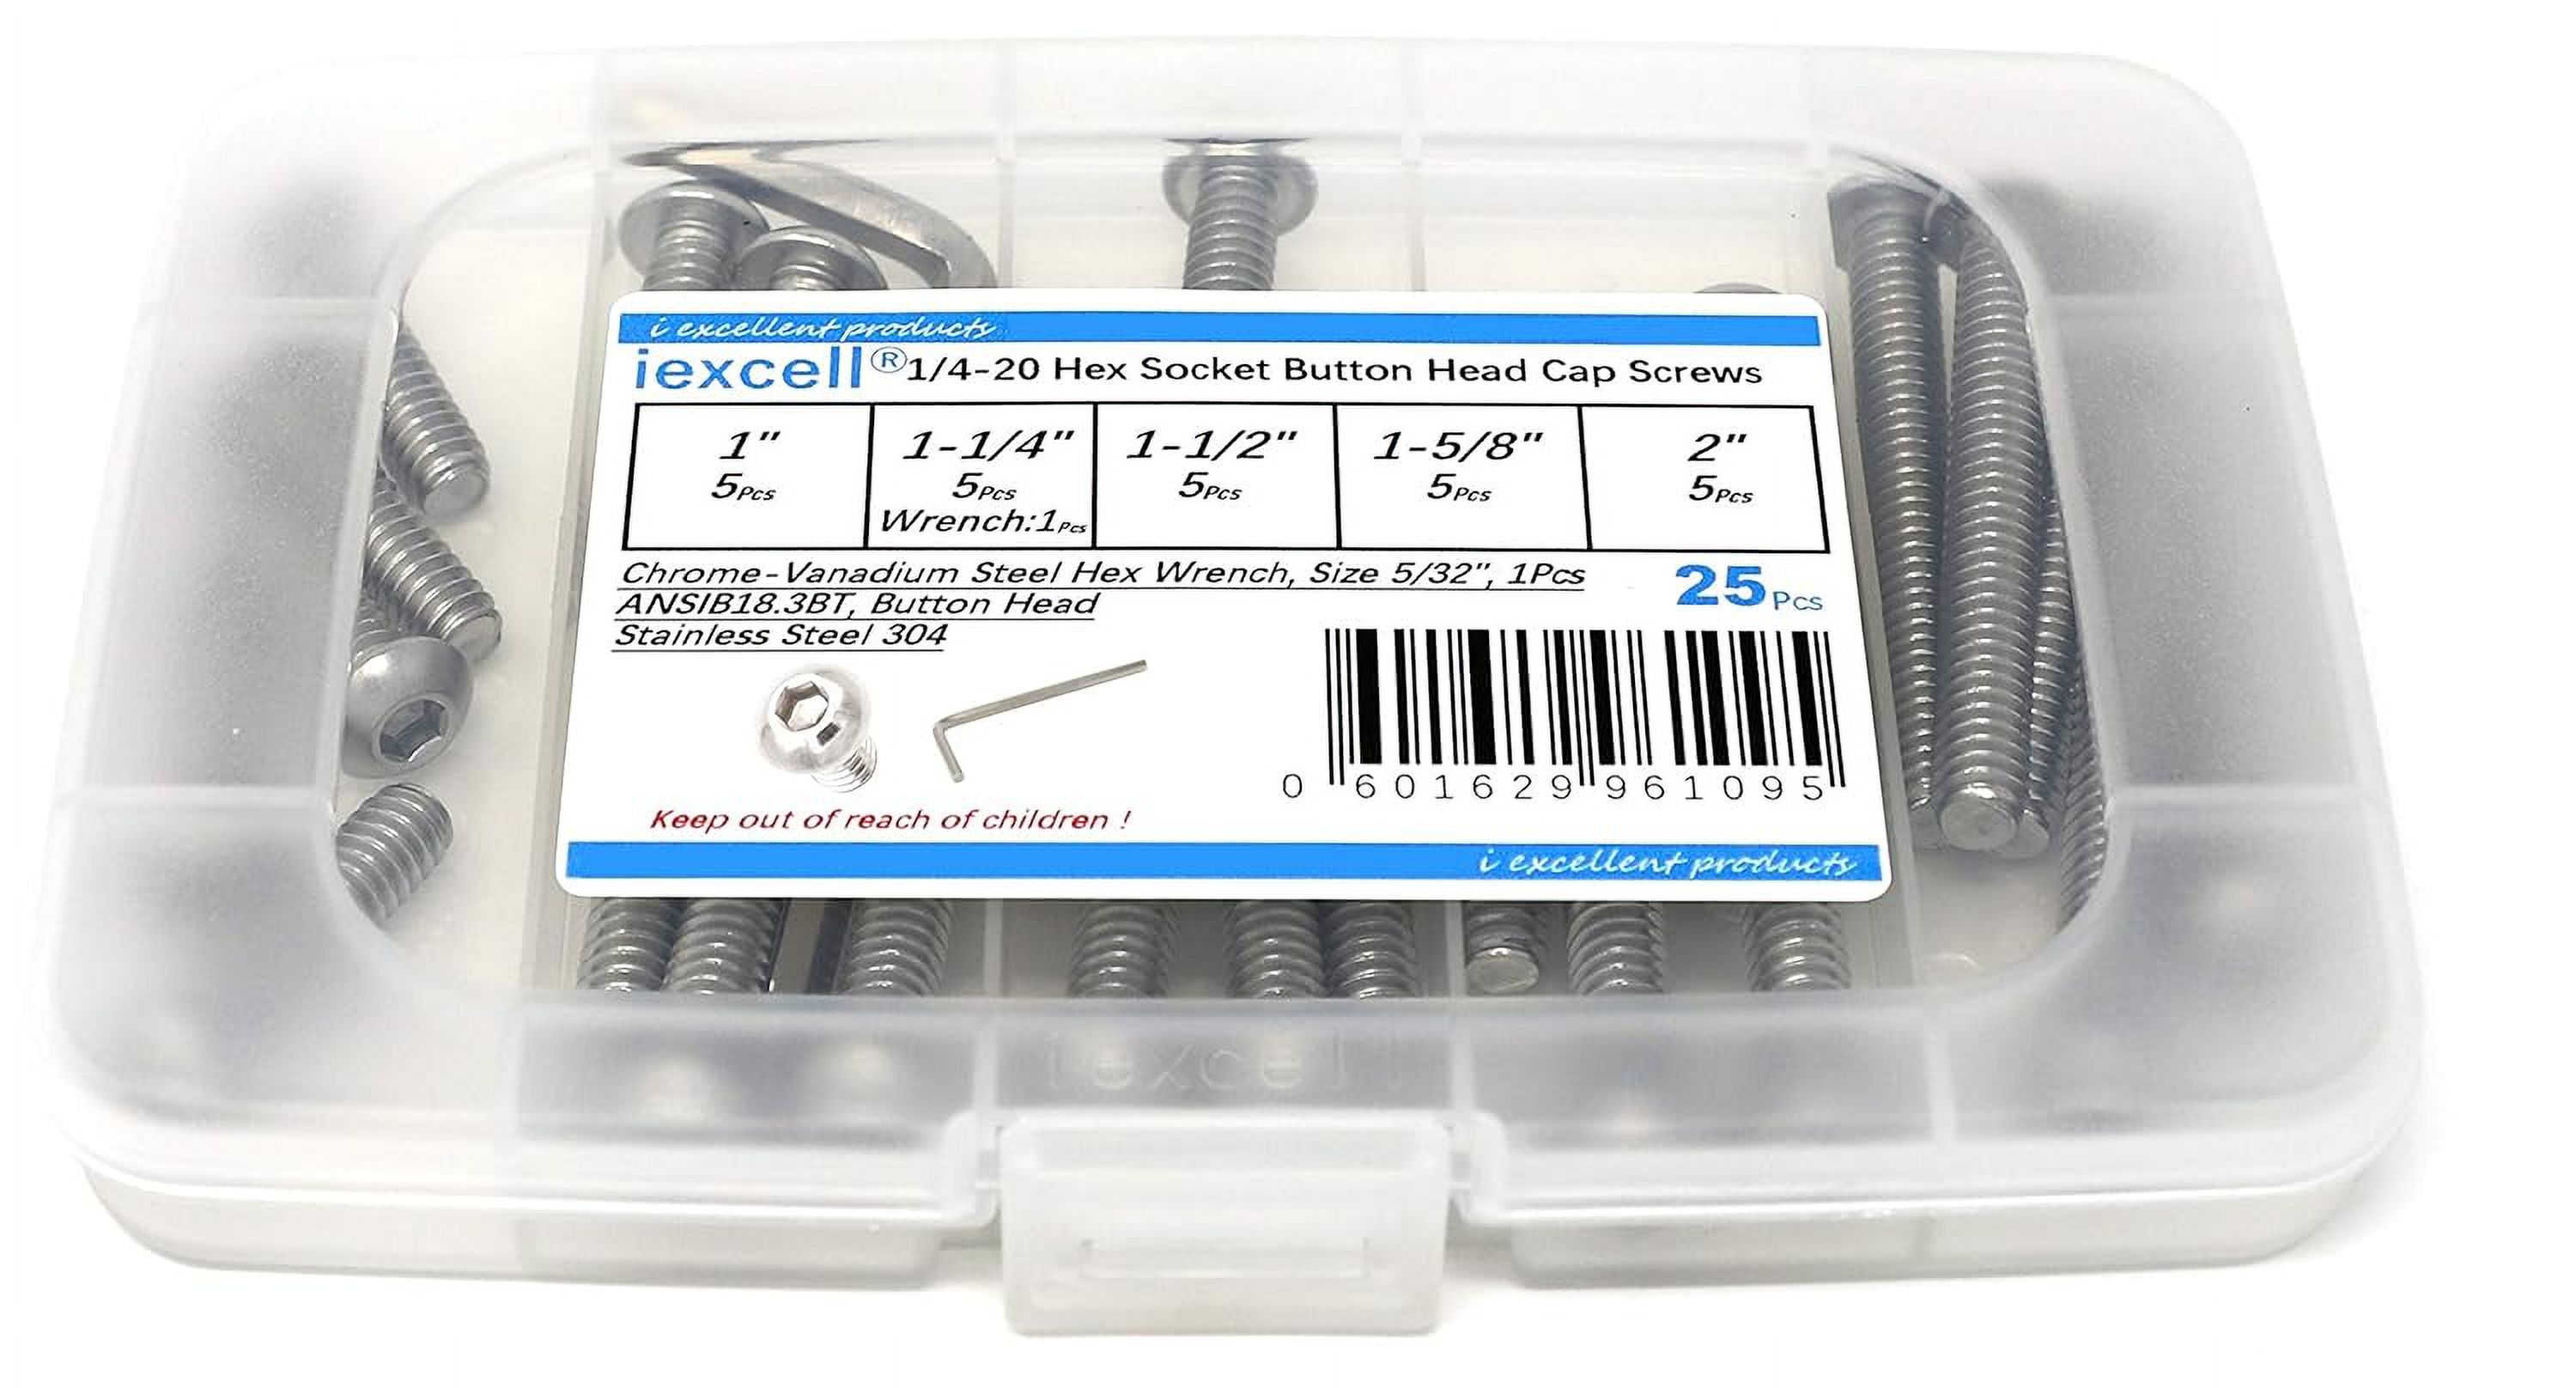 iexcell 25 Pcs SAE x 1, 2 UNC Threads Stainless Steel 304 Hex Socket Button Head Cap Screws Bolts Assortment Kit - image 1 of 4